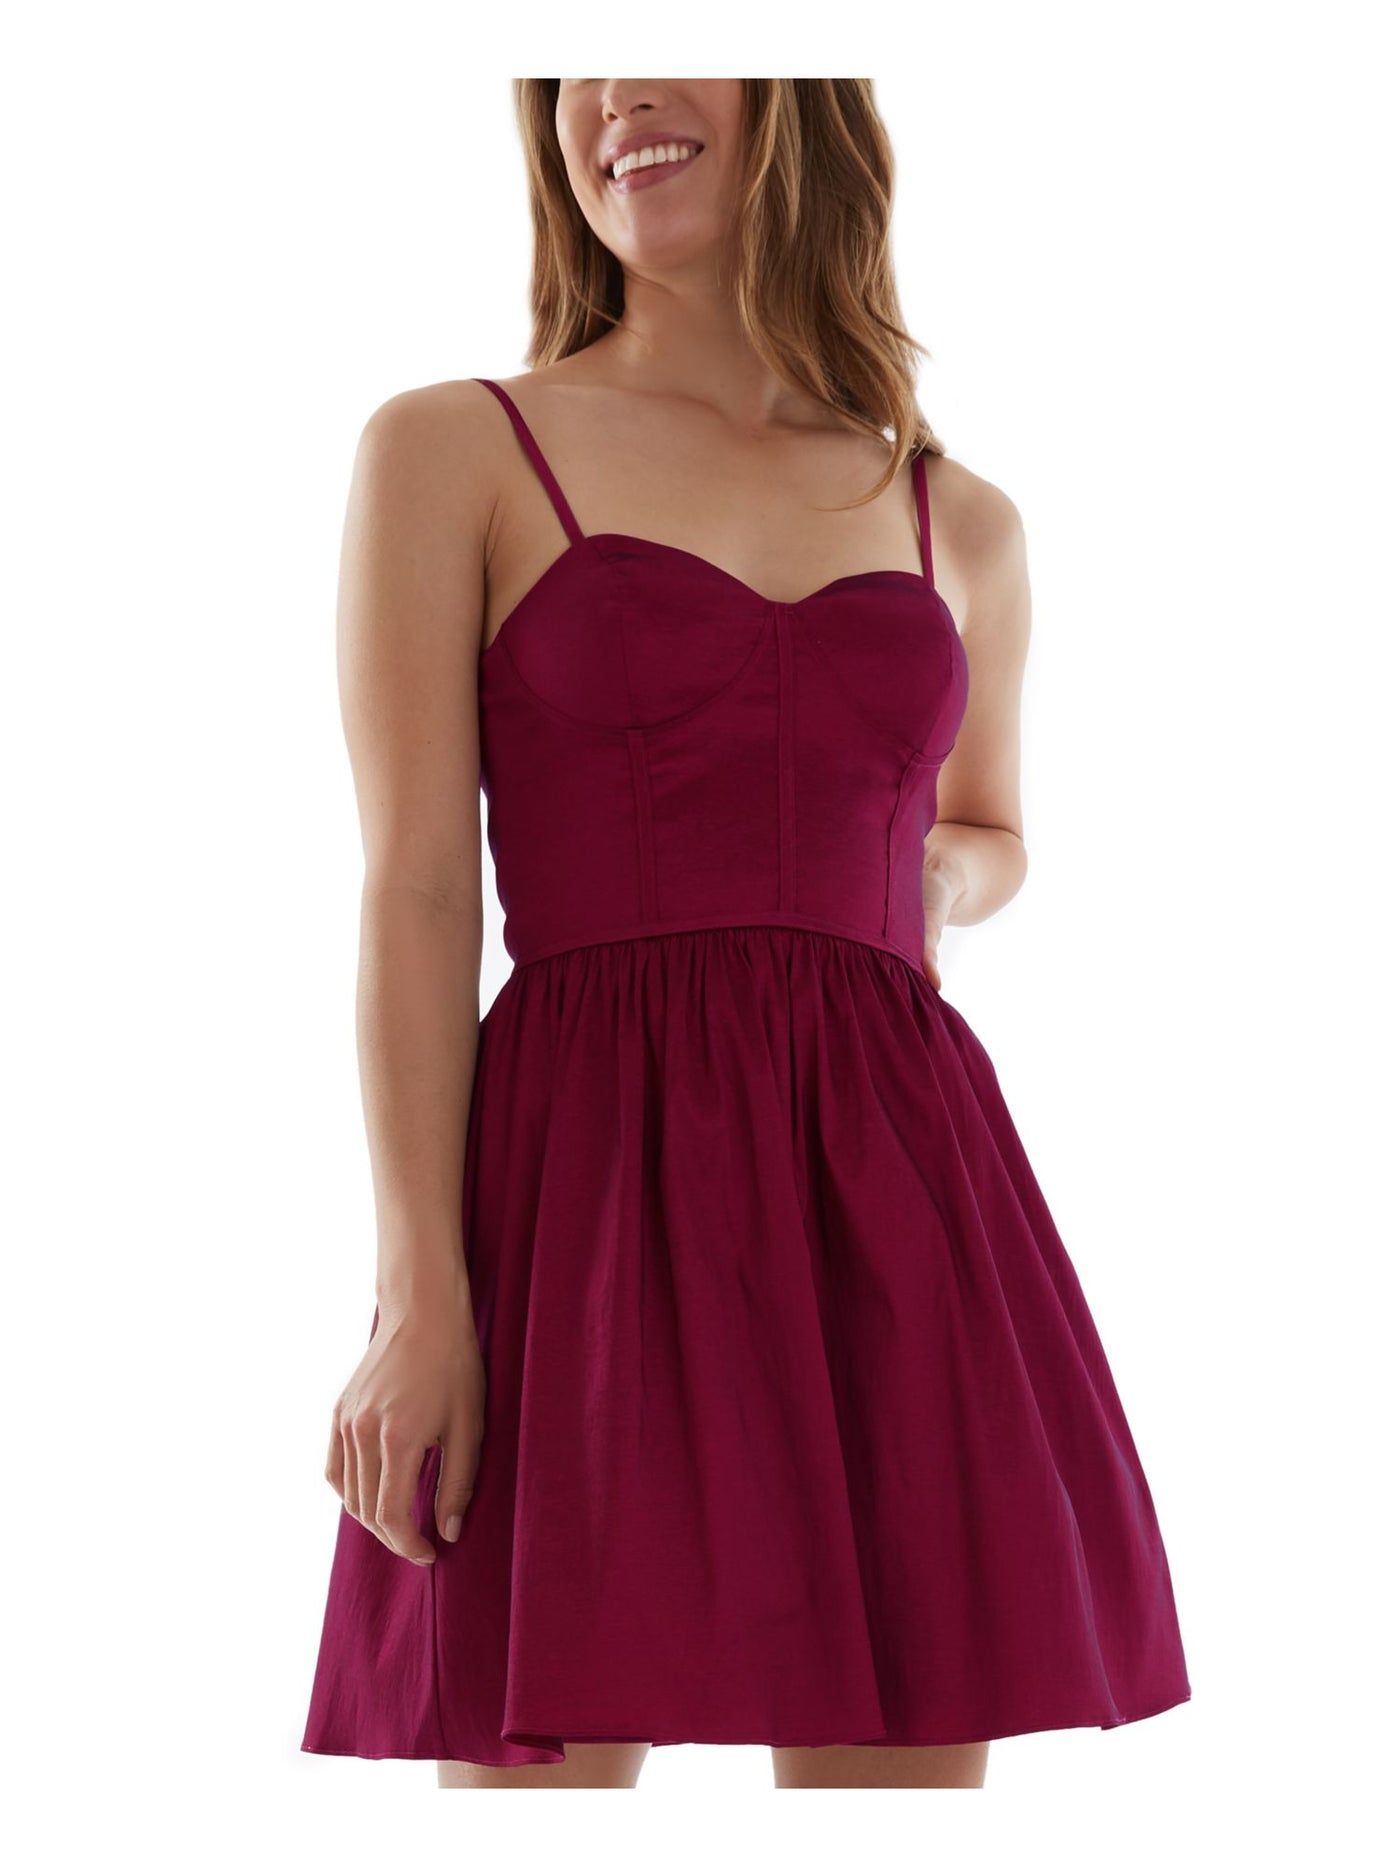 BCX DRESS Womens Burgundy Stretch Zippered Pleated Bustier Style Spaghetti Strap Sweetheart Neckline Mini Party Fit + Flare Dress Juniors 3